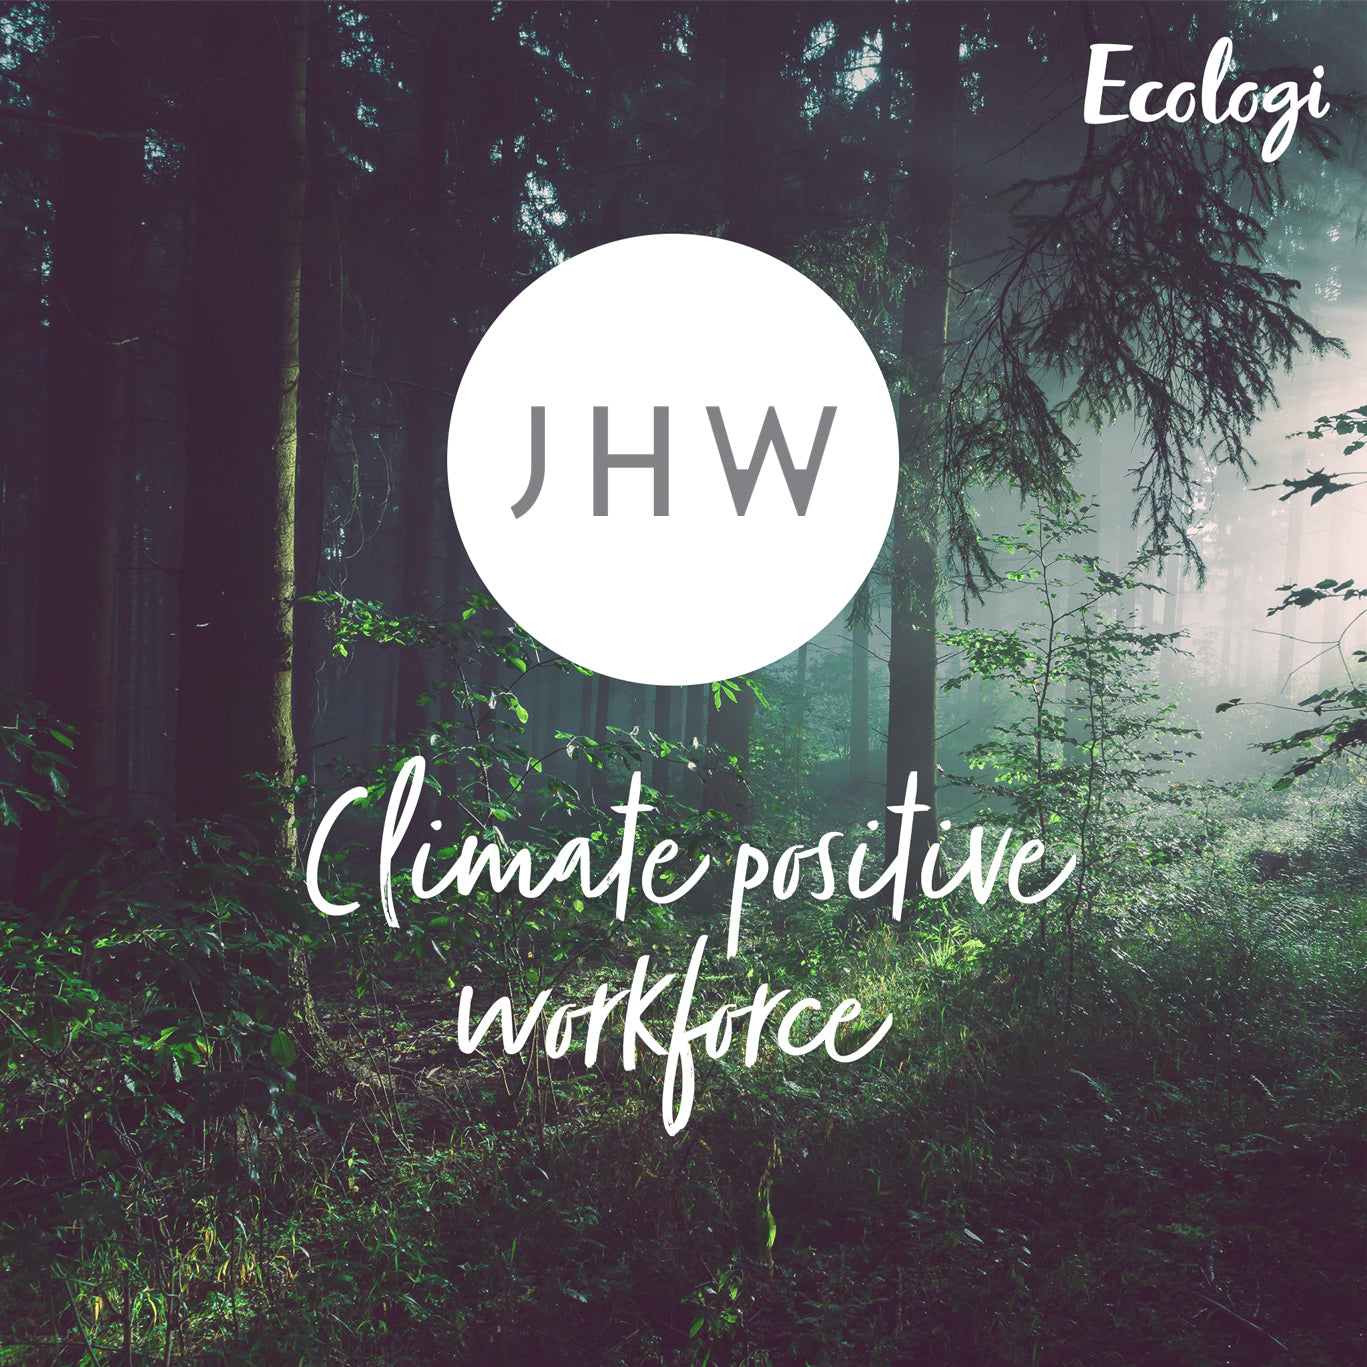 JHW and Ecologi - Climate positive workforce